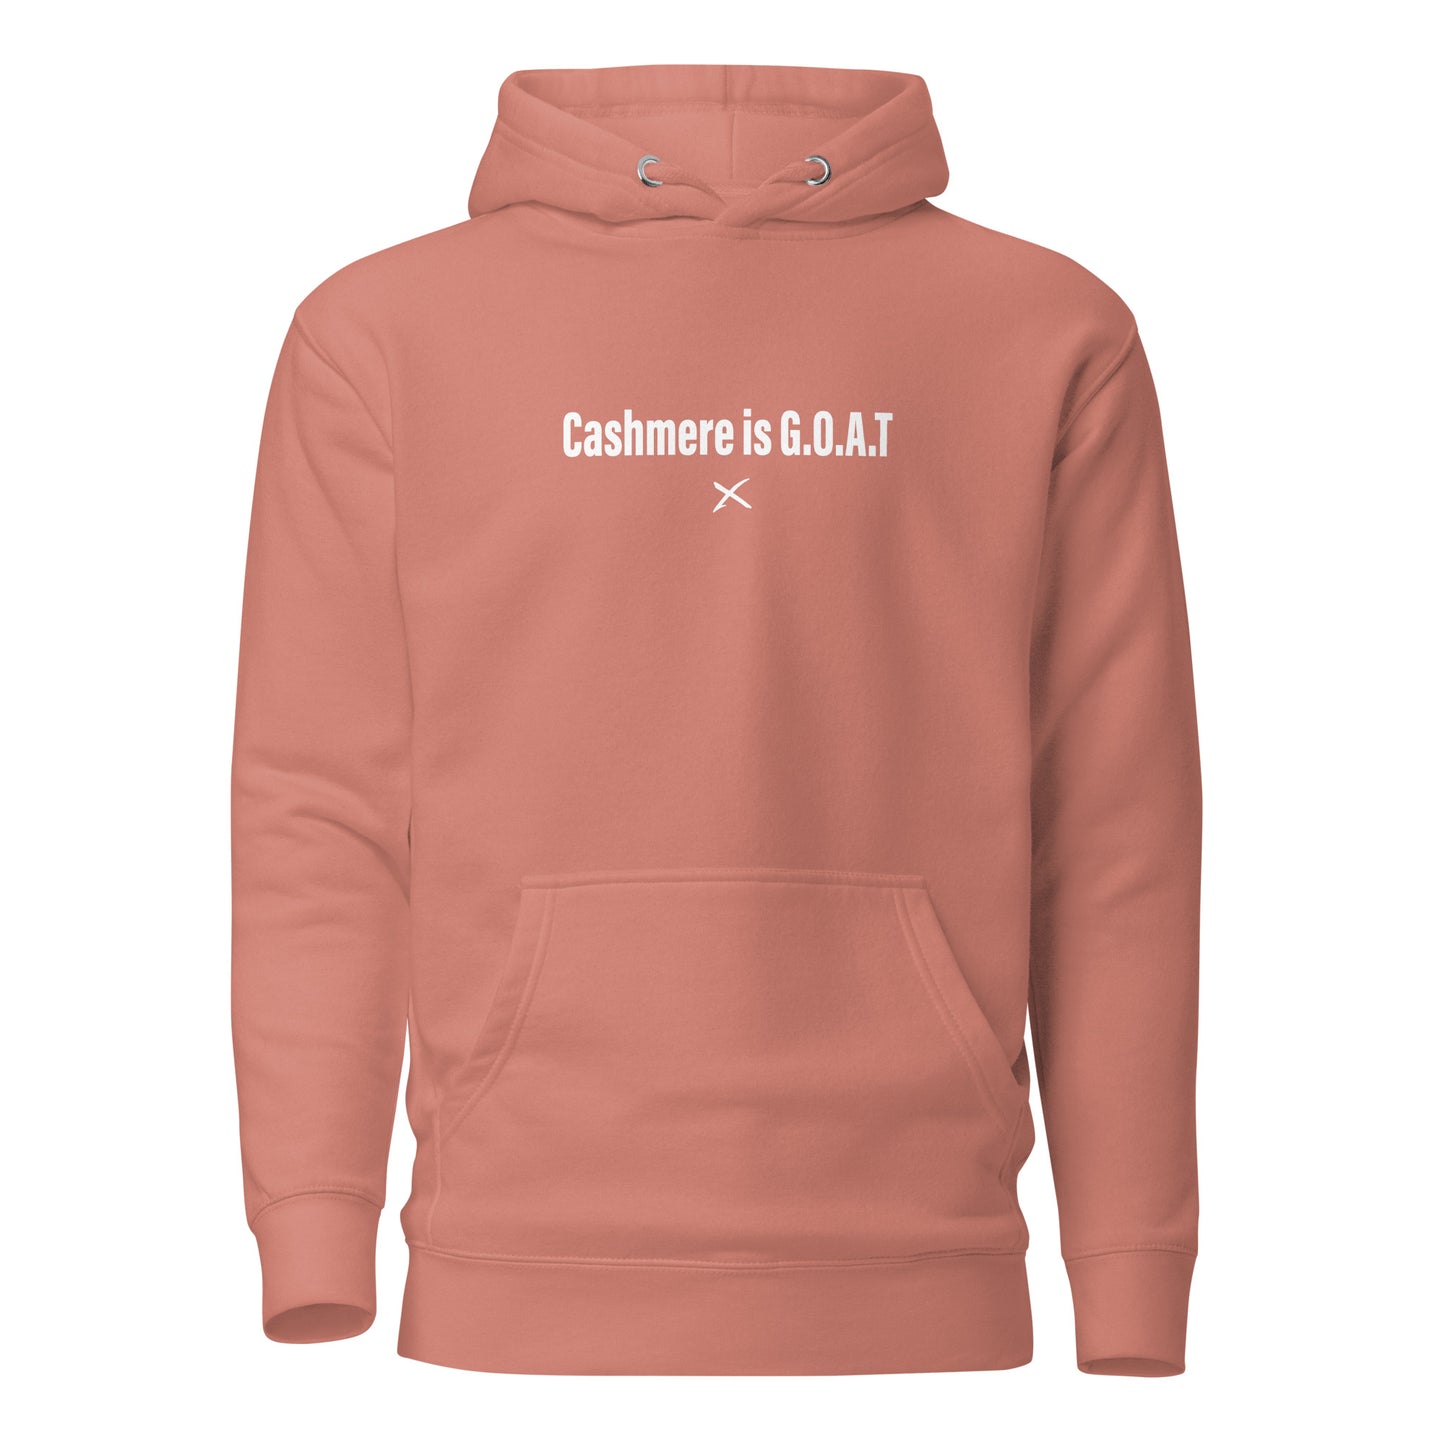 Cashmere is G.O.A.T - Hoodie